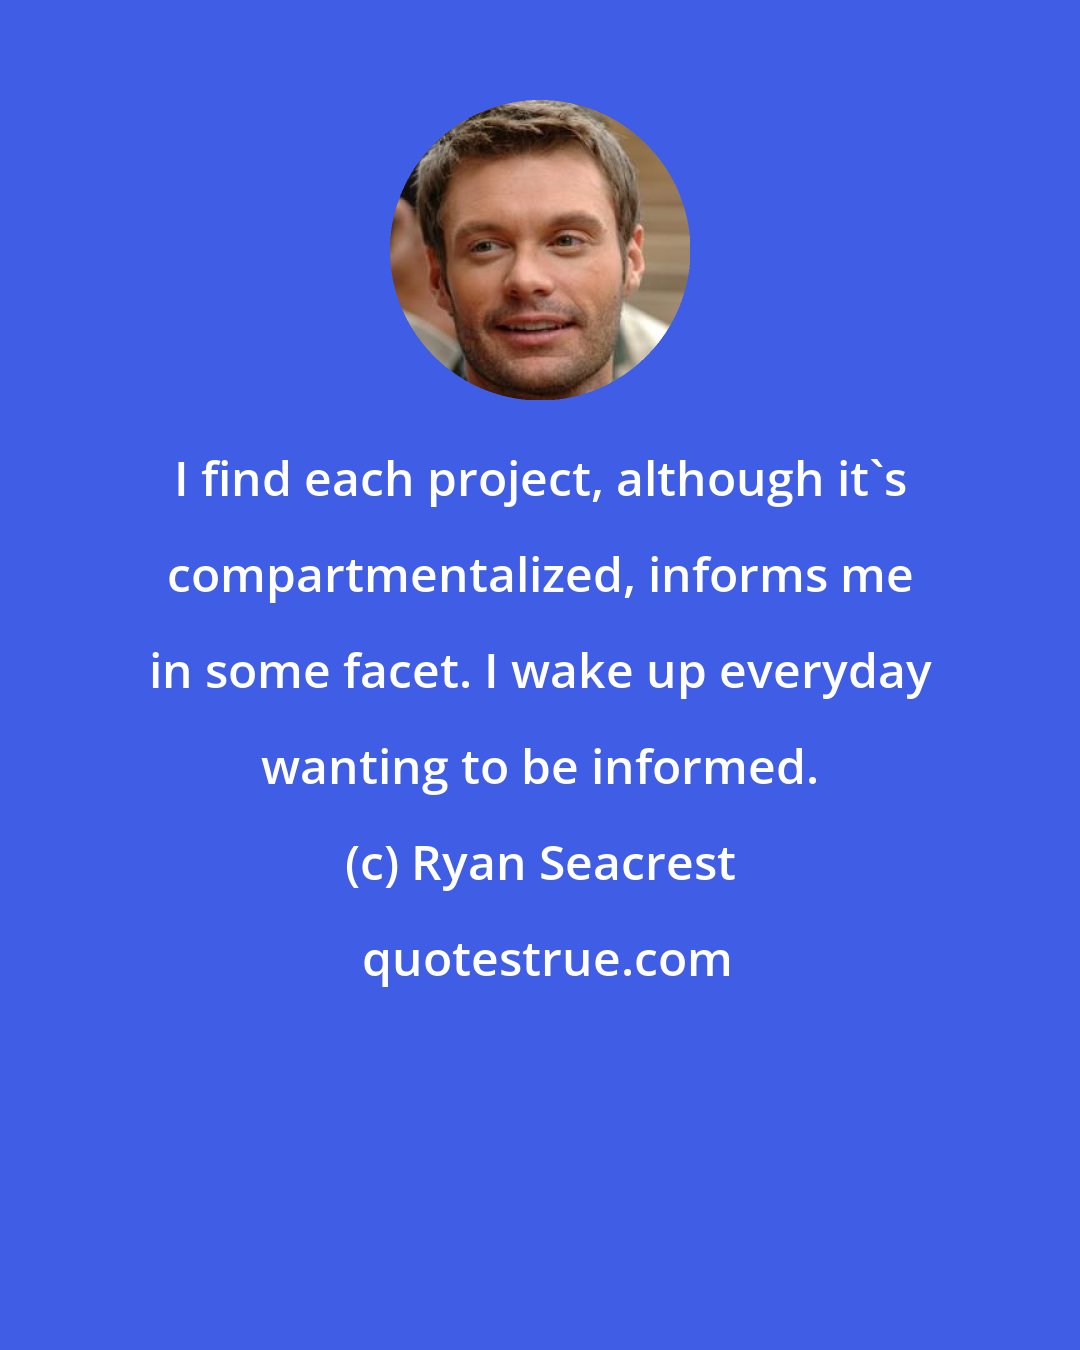 Ryan Seacrest: I find each project, although it's compartmentalized, informs me in some facet. I wake up everyday wanting to be informed.